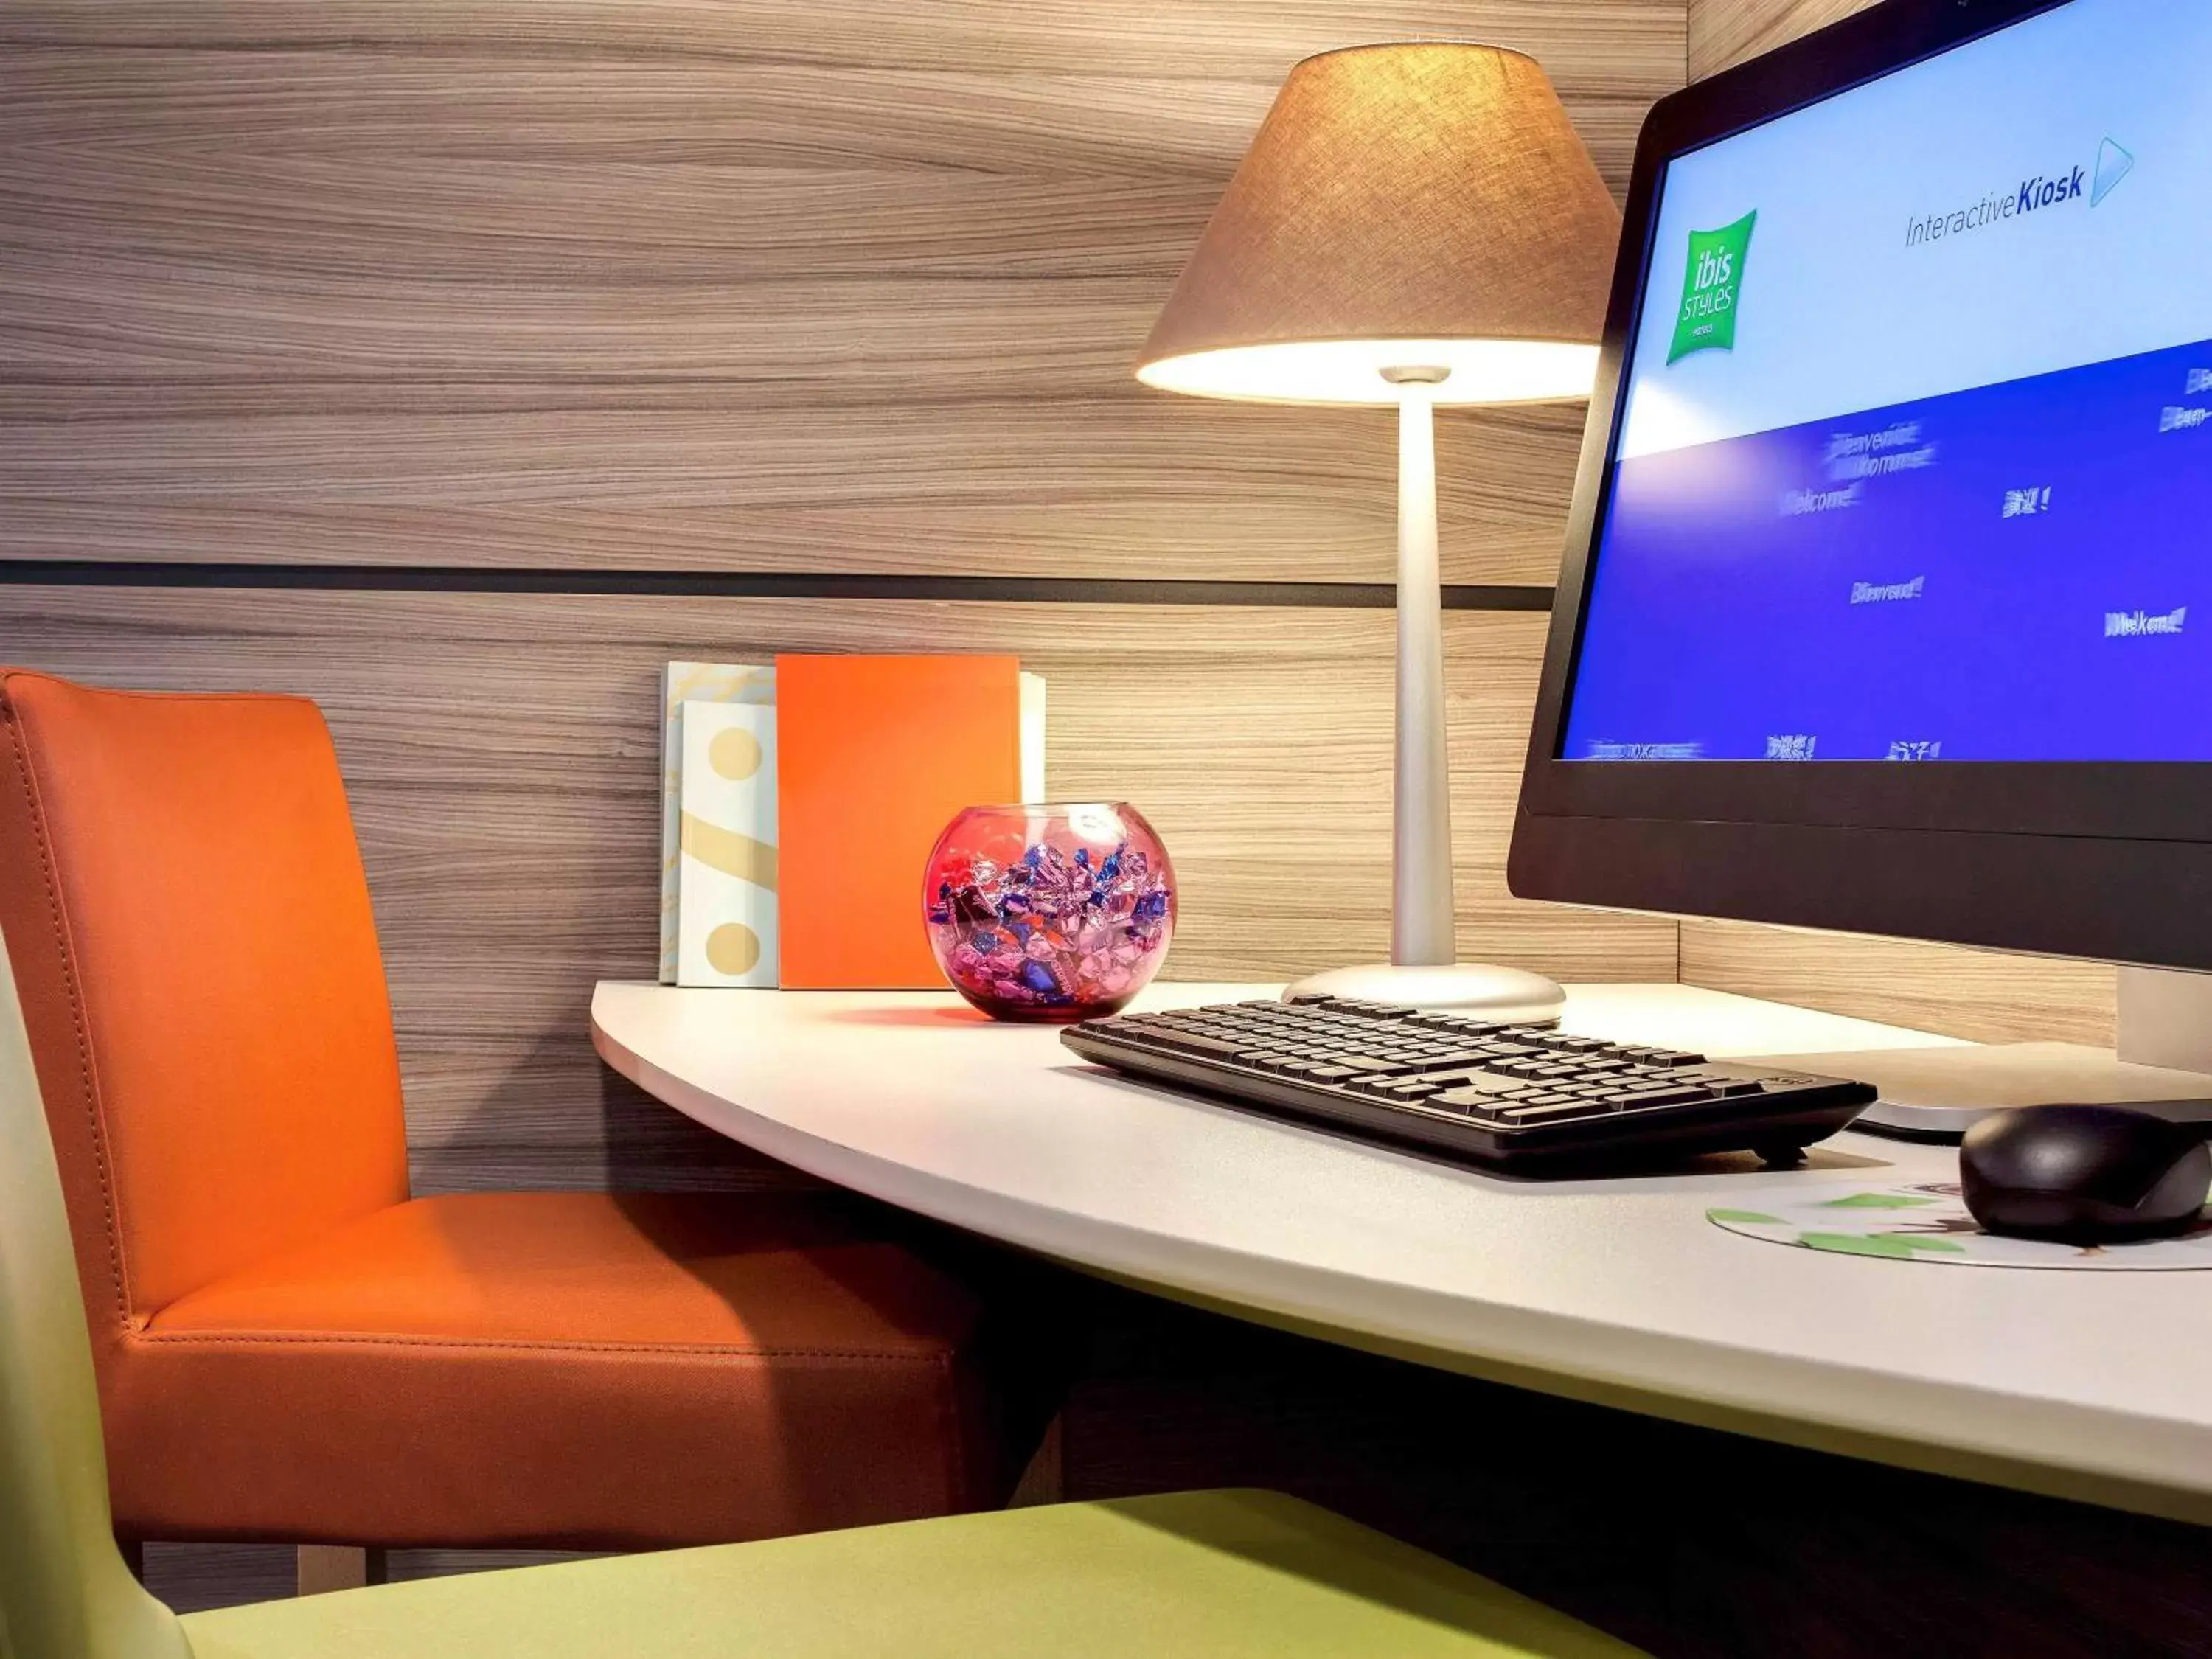 On site in ibis Styles Clermont-Ferrand Aéroport